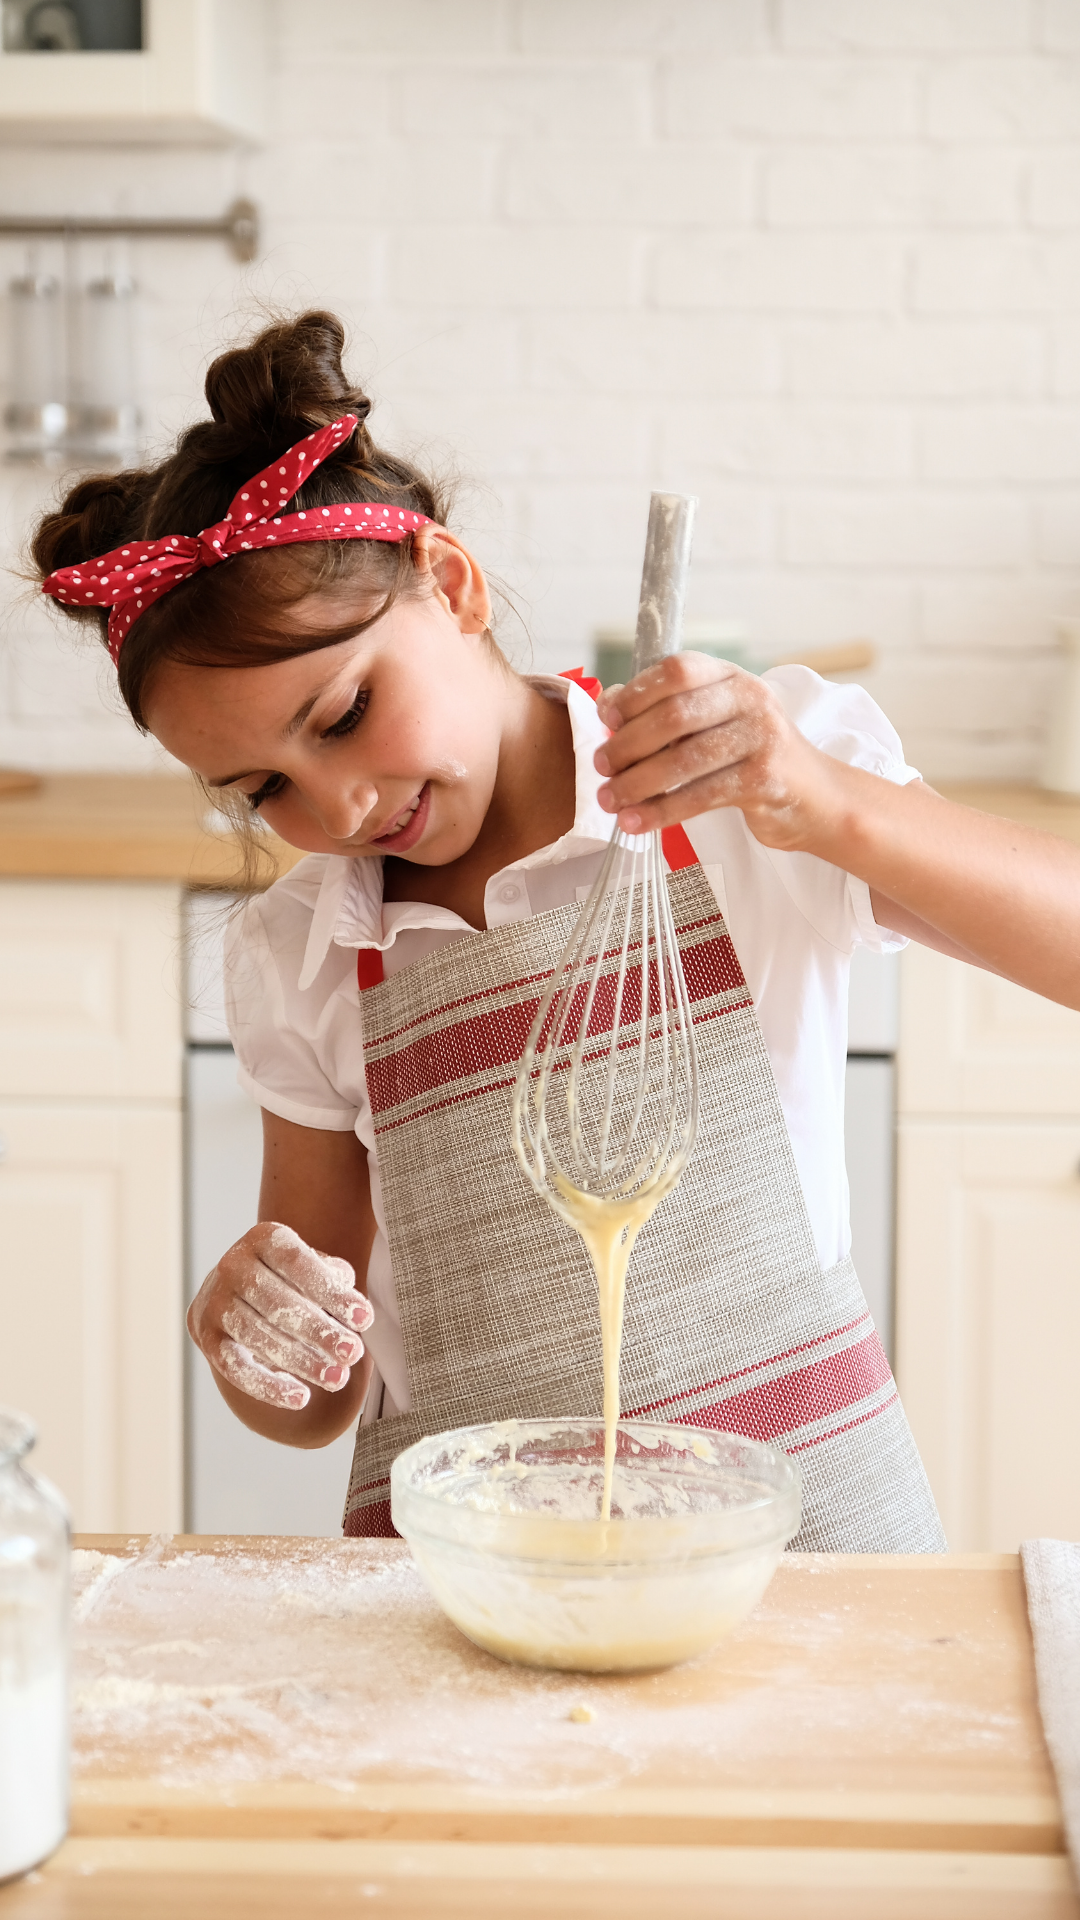 5 Amazing No-Bake Recipes To Get Your Kids Excited About Cooking